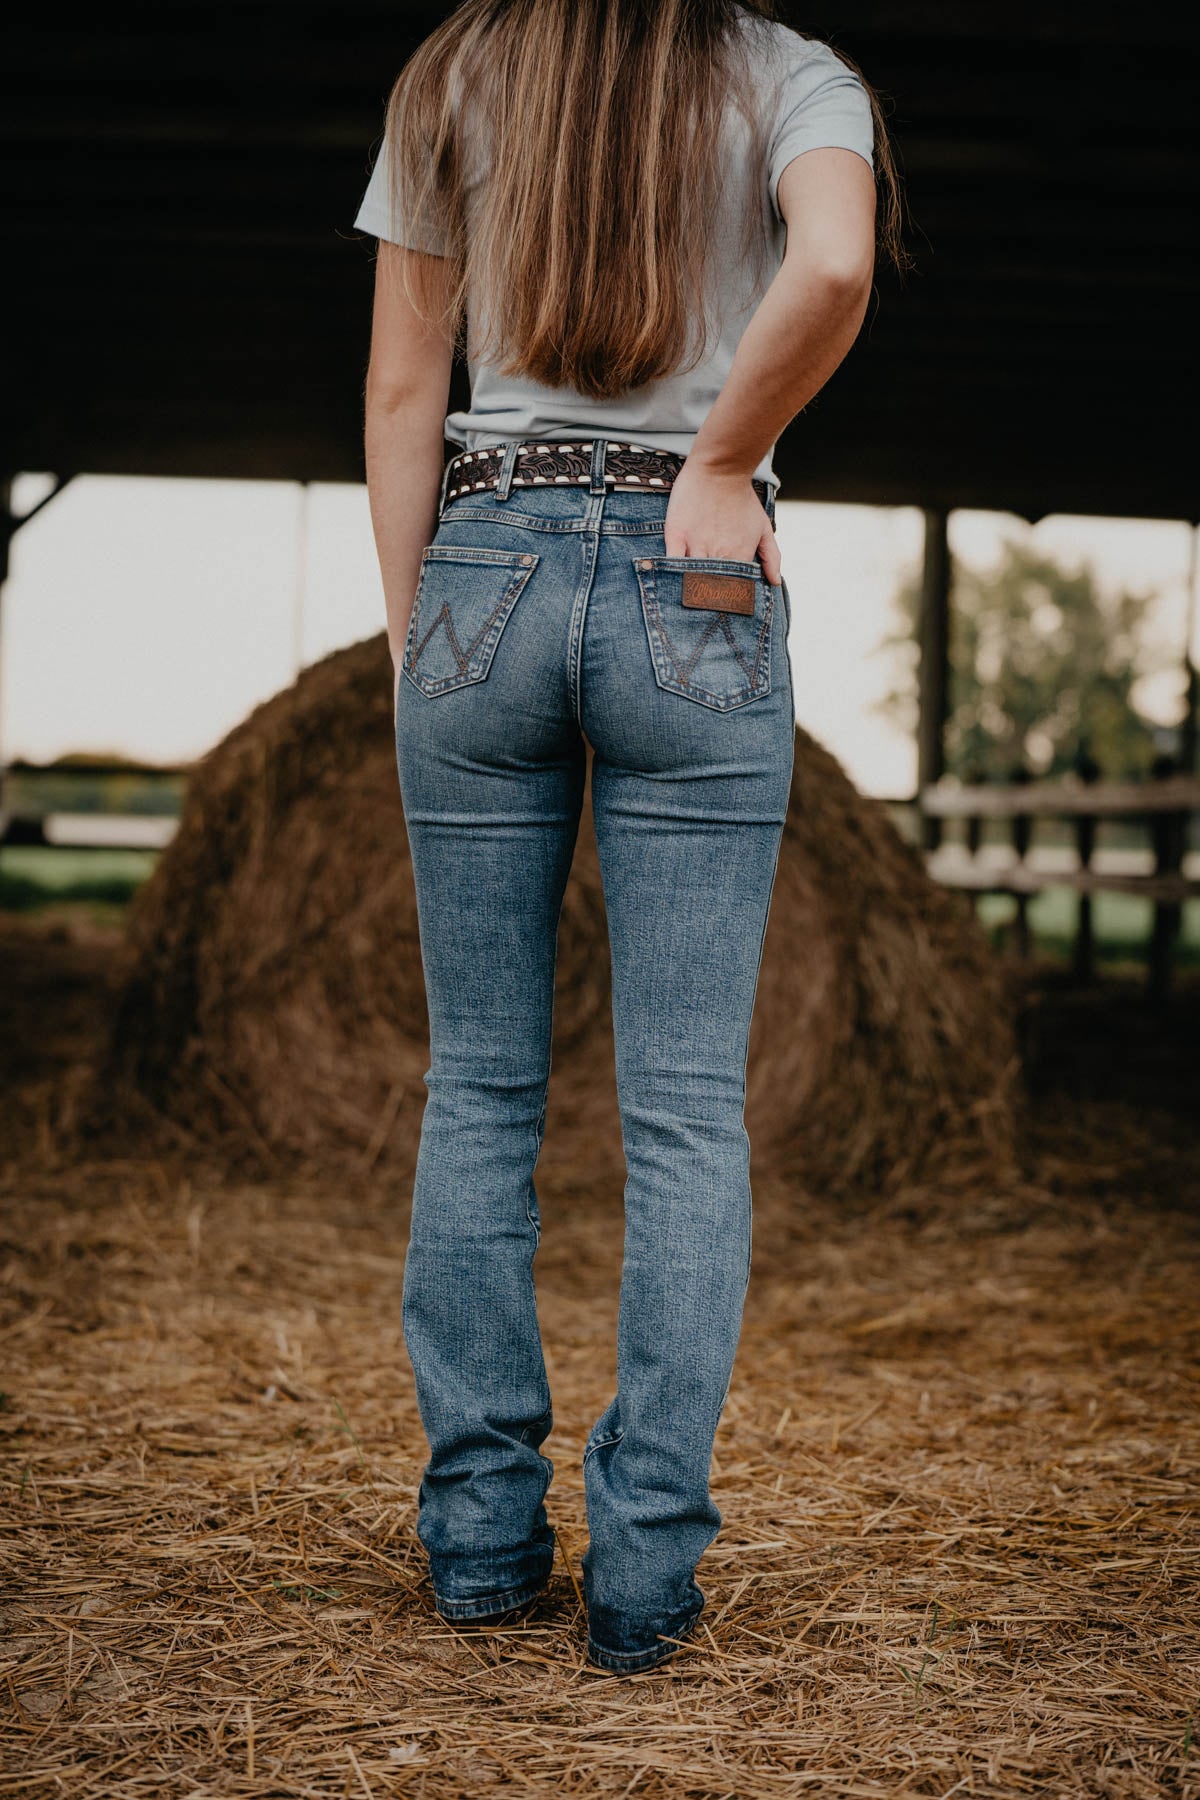 Wrangler Debuts the 6 High-Rise Jeans Every Woman Needs